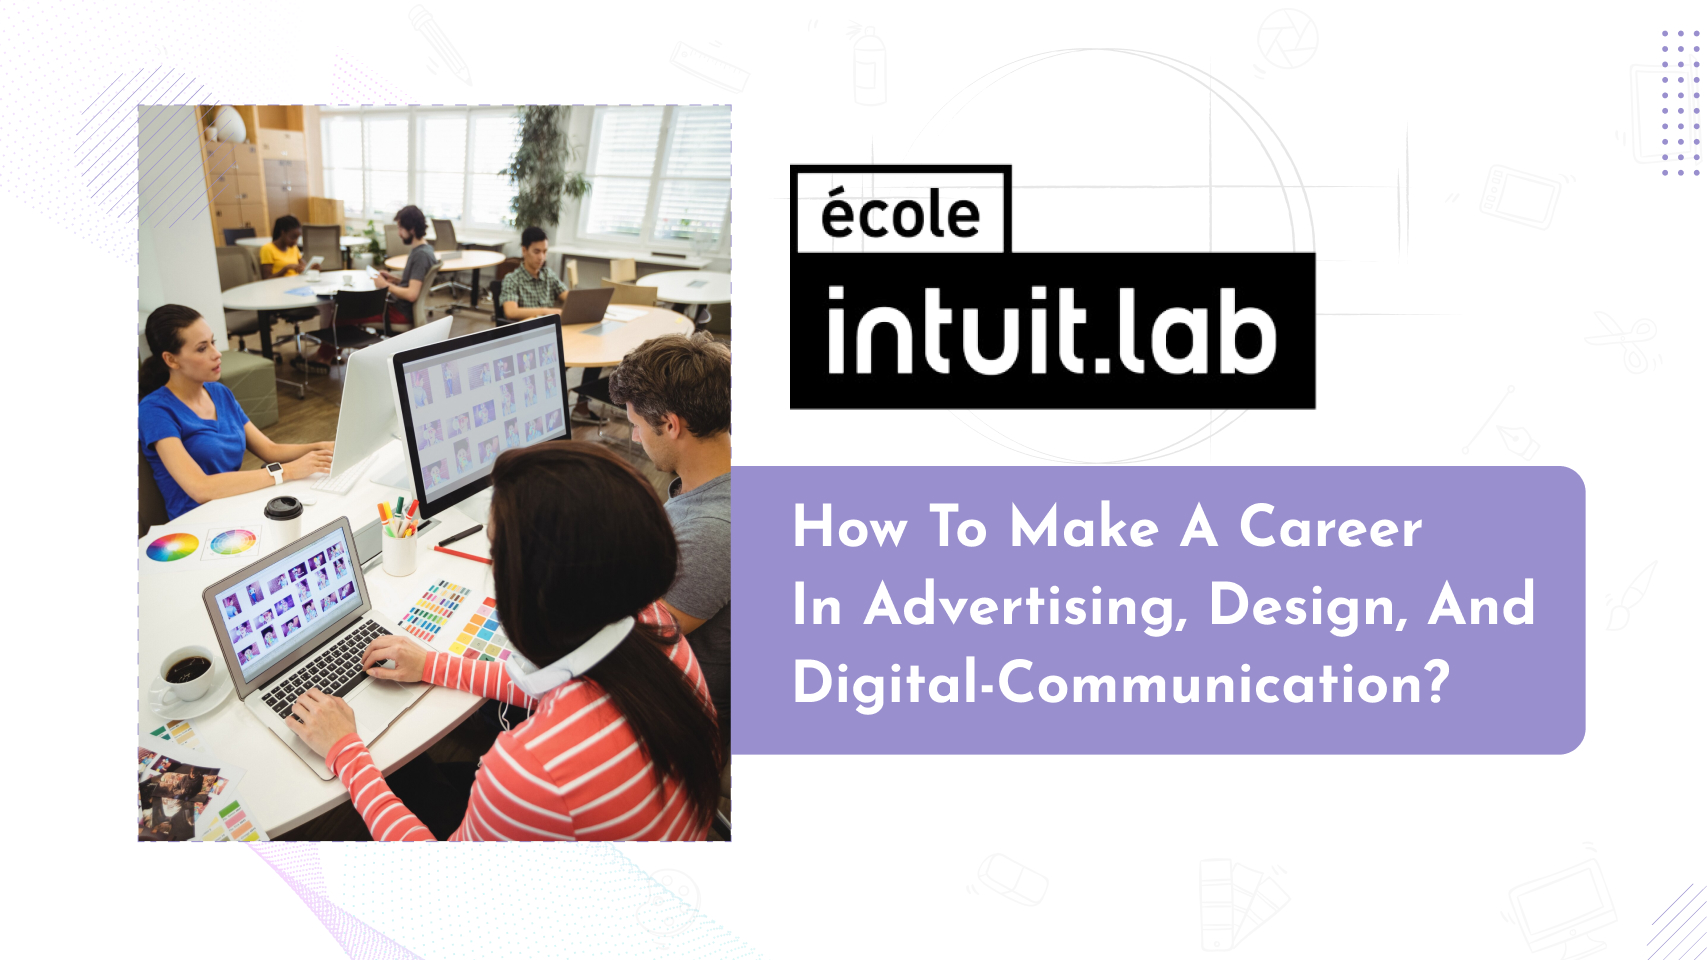 How to make a career in advertising, design, and digital-communication?